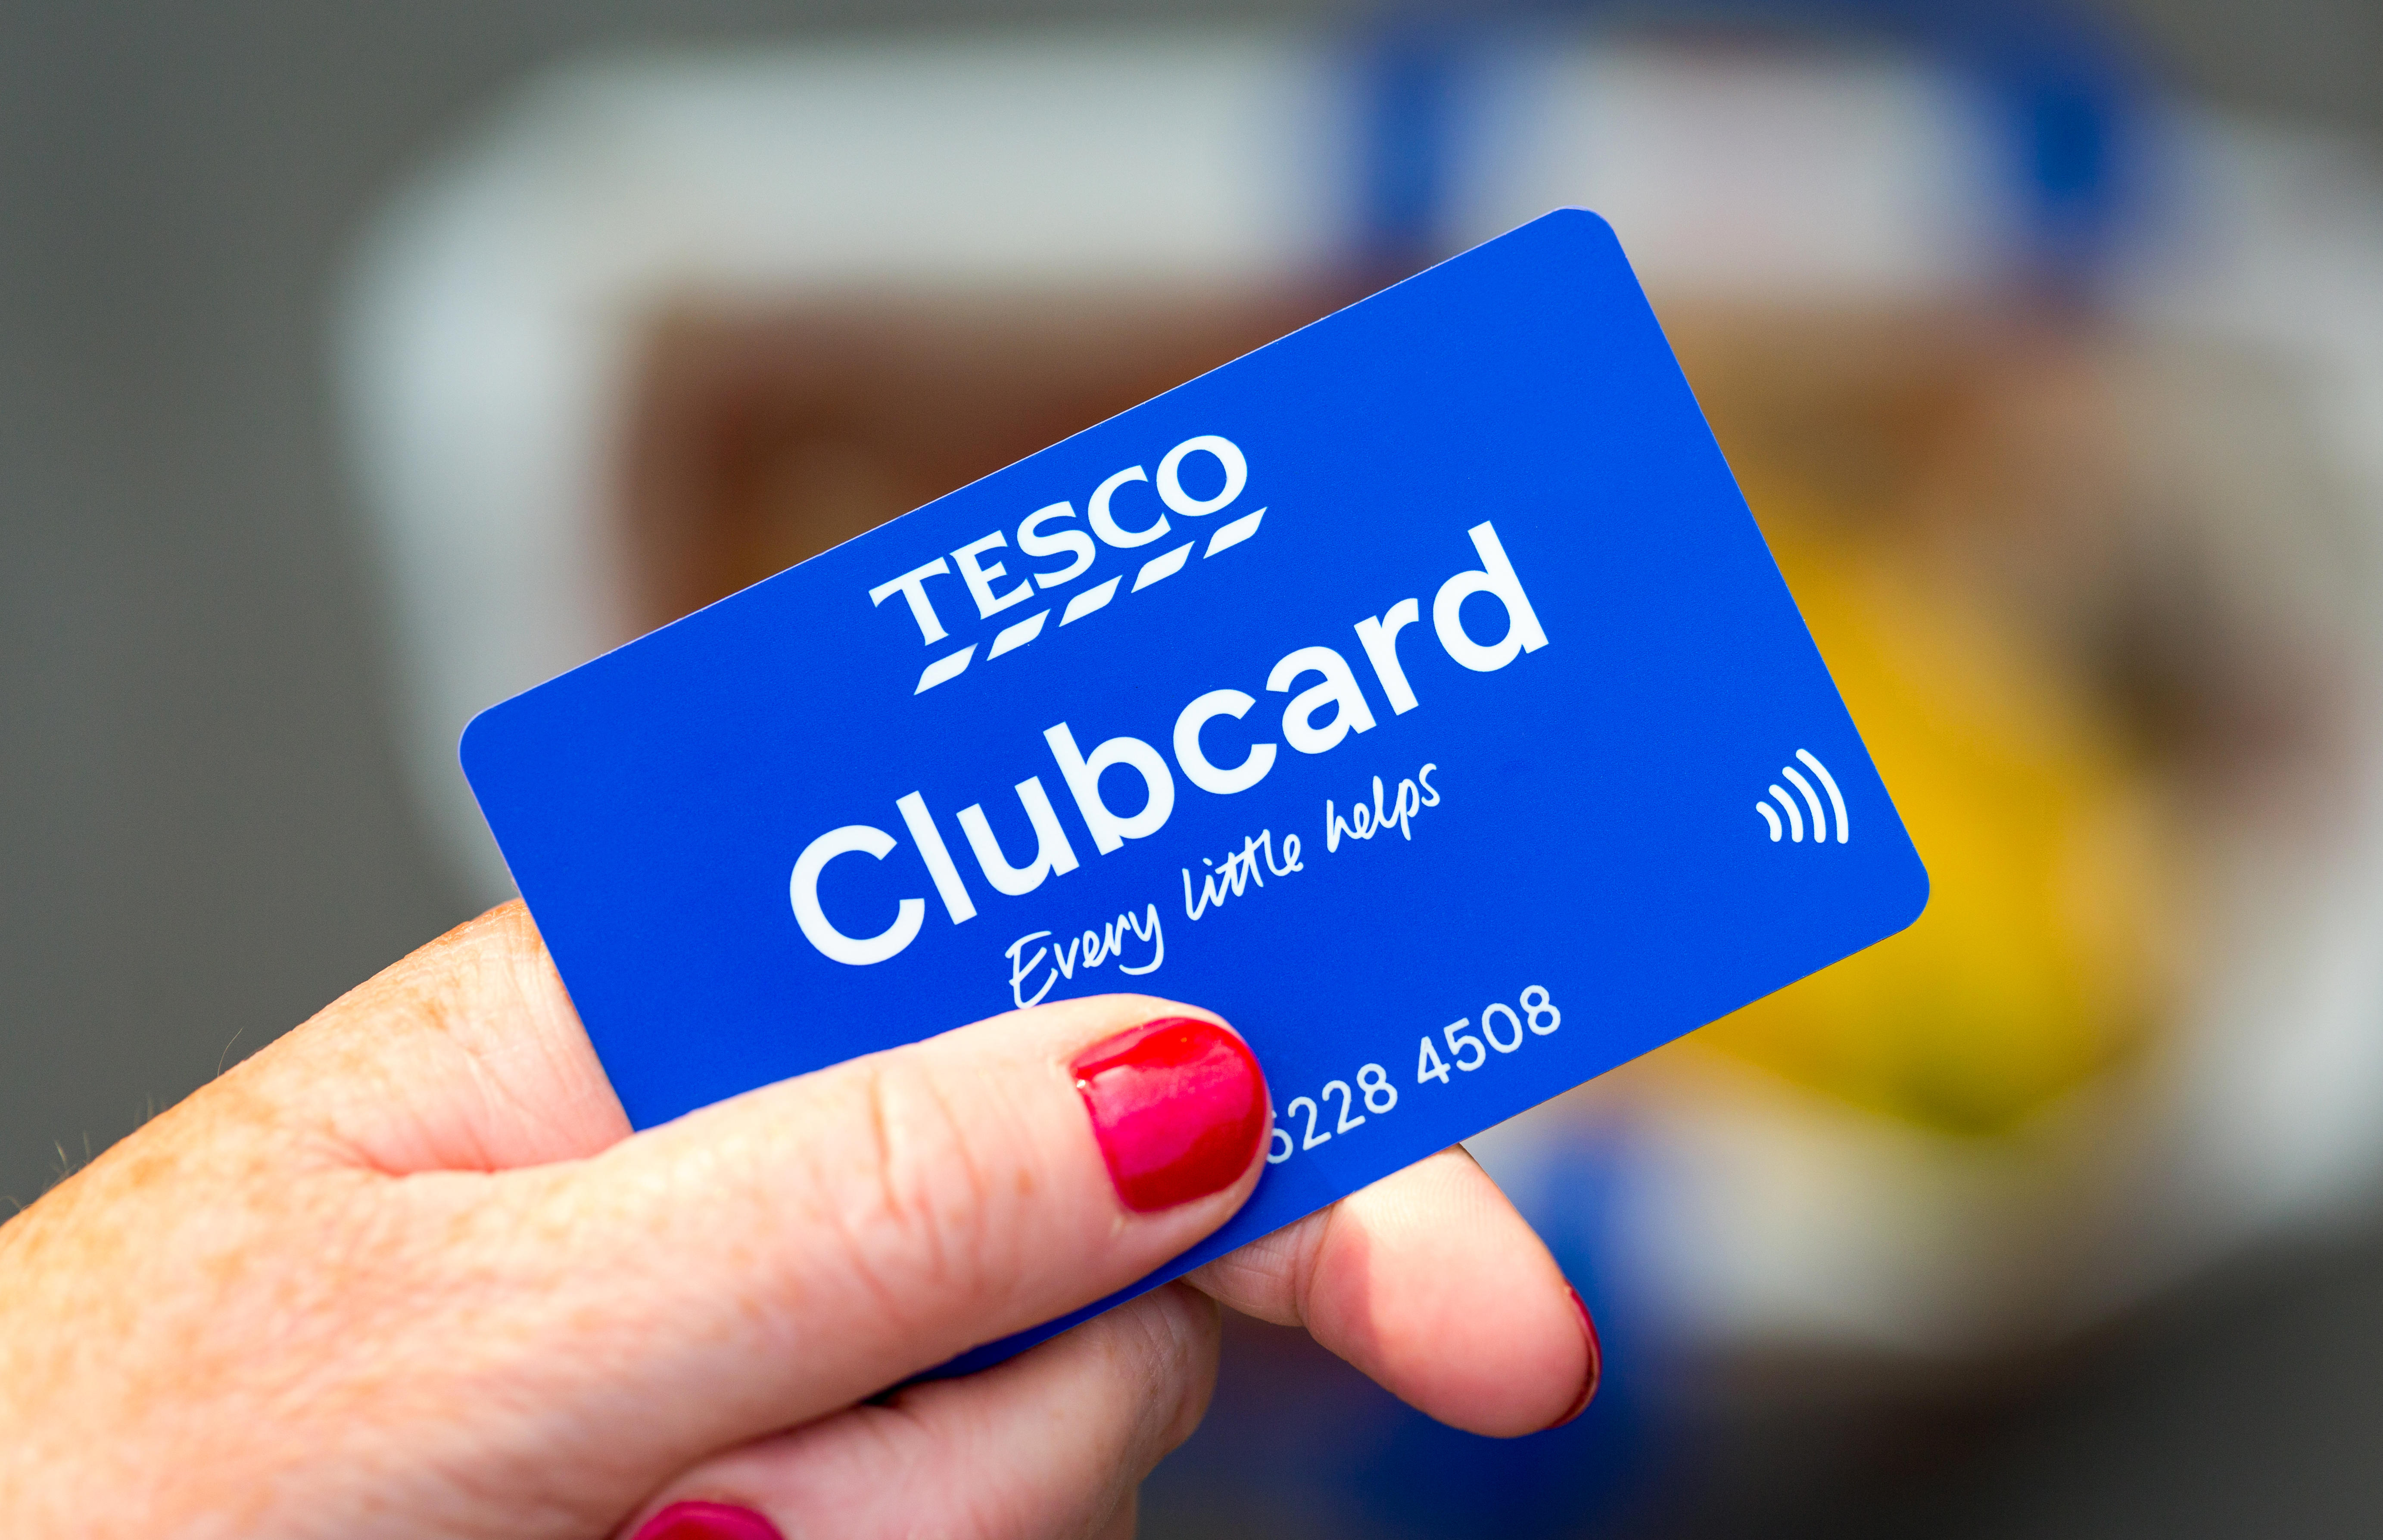 Millions of Tesco shoppers have weeks left to redeem Clubcard points earned in May 2022